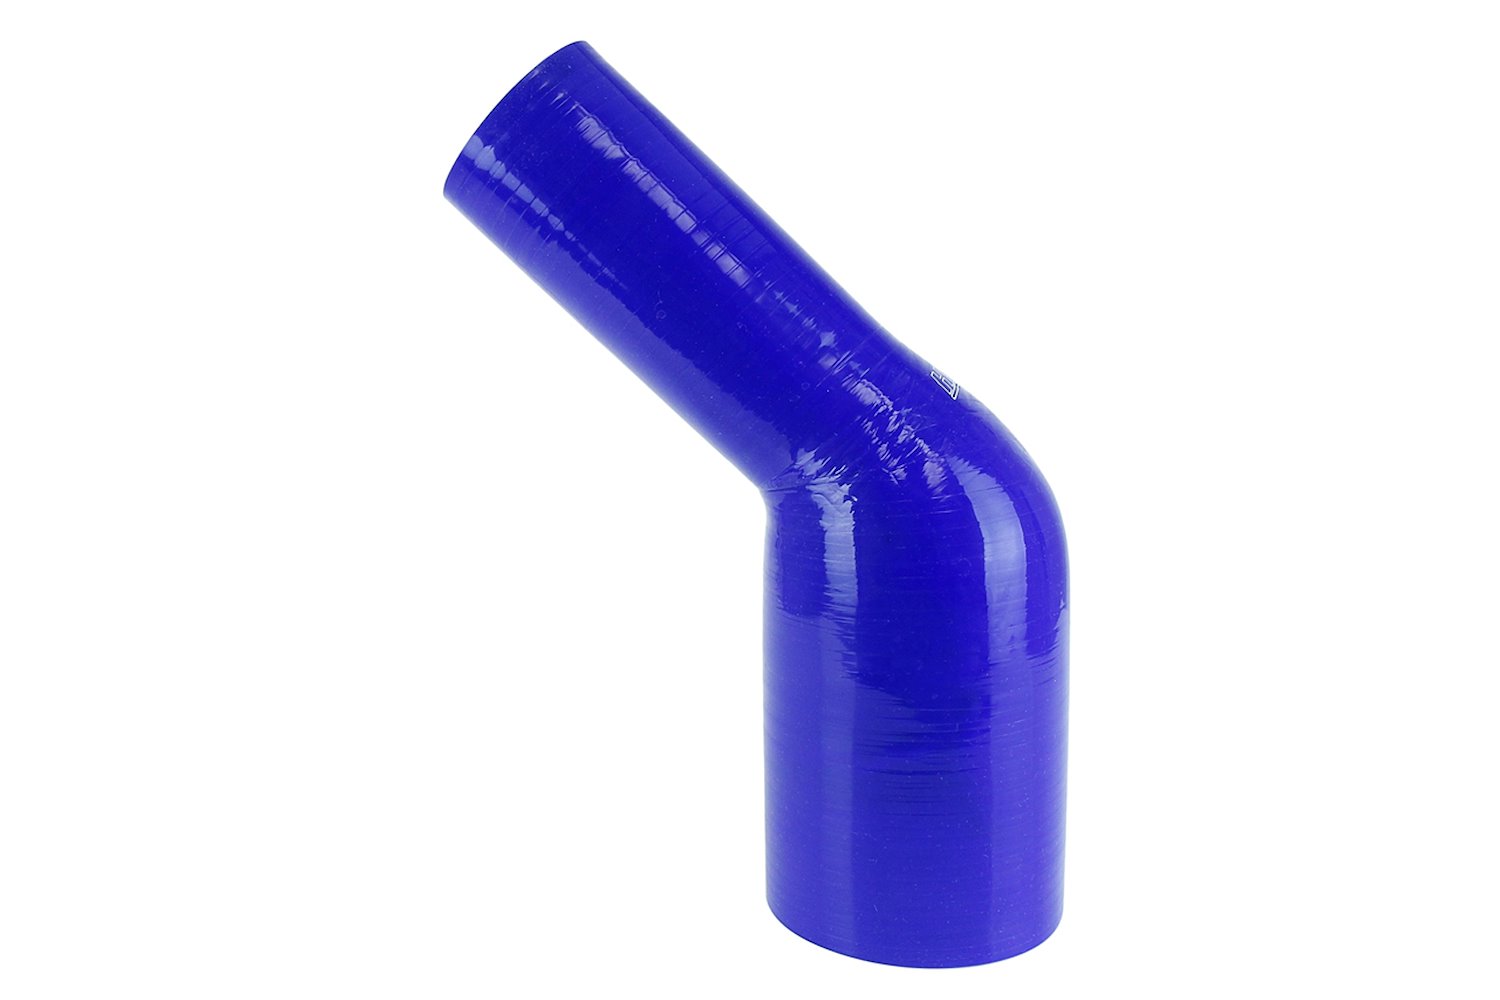 HTSER45-238-300-BLUE Silicone 45-Degree Elbow Hose, High-Temp 4-Ply Reinforced, 2-3/8 in. - 3 in. ID, Blue